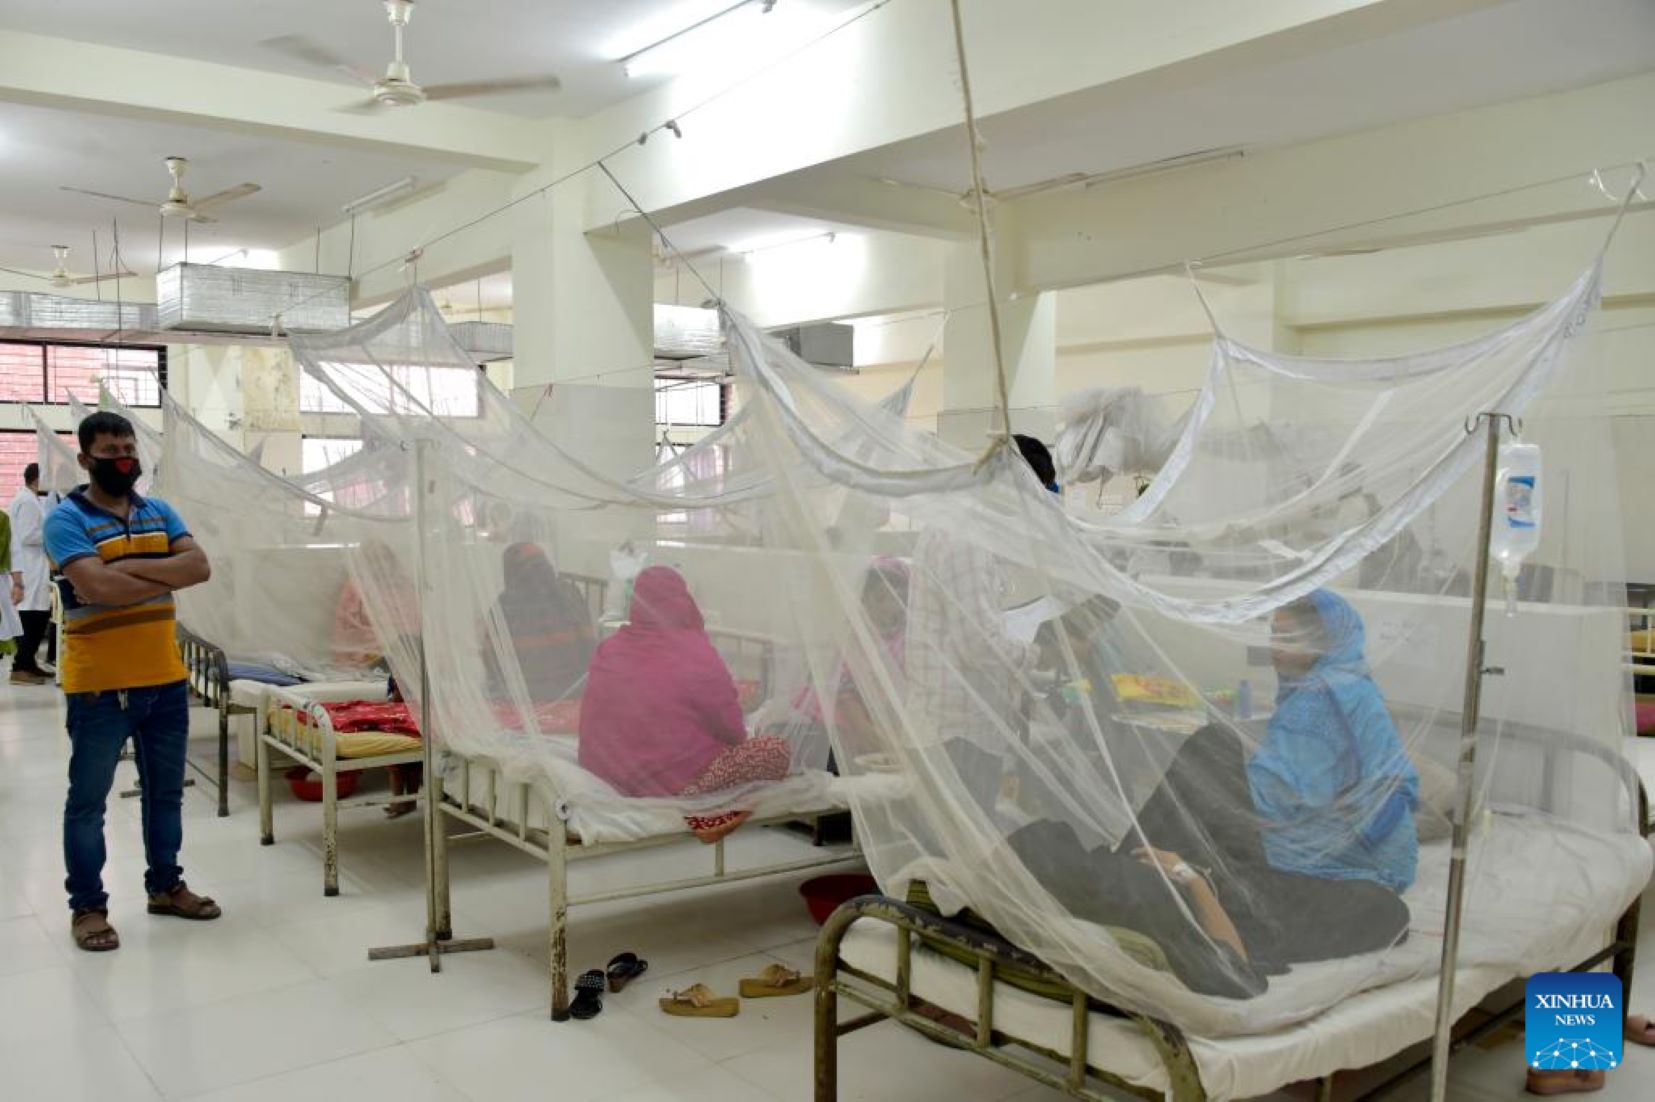 Bangladesh’s Dengue Cases Soar Past 300,000 With 1,549 Deaths